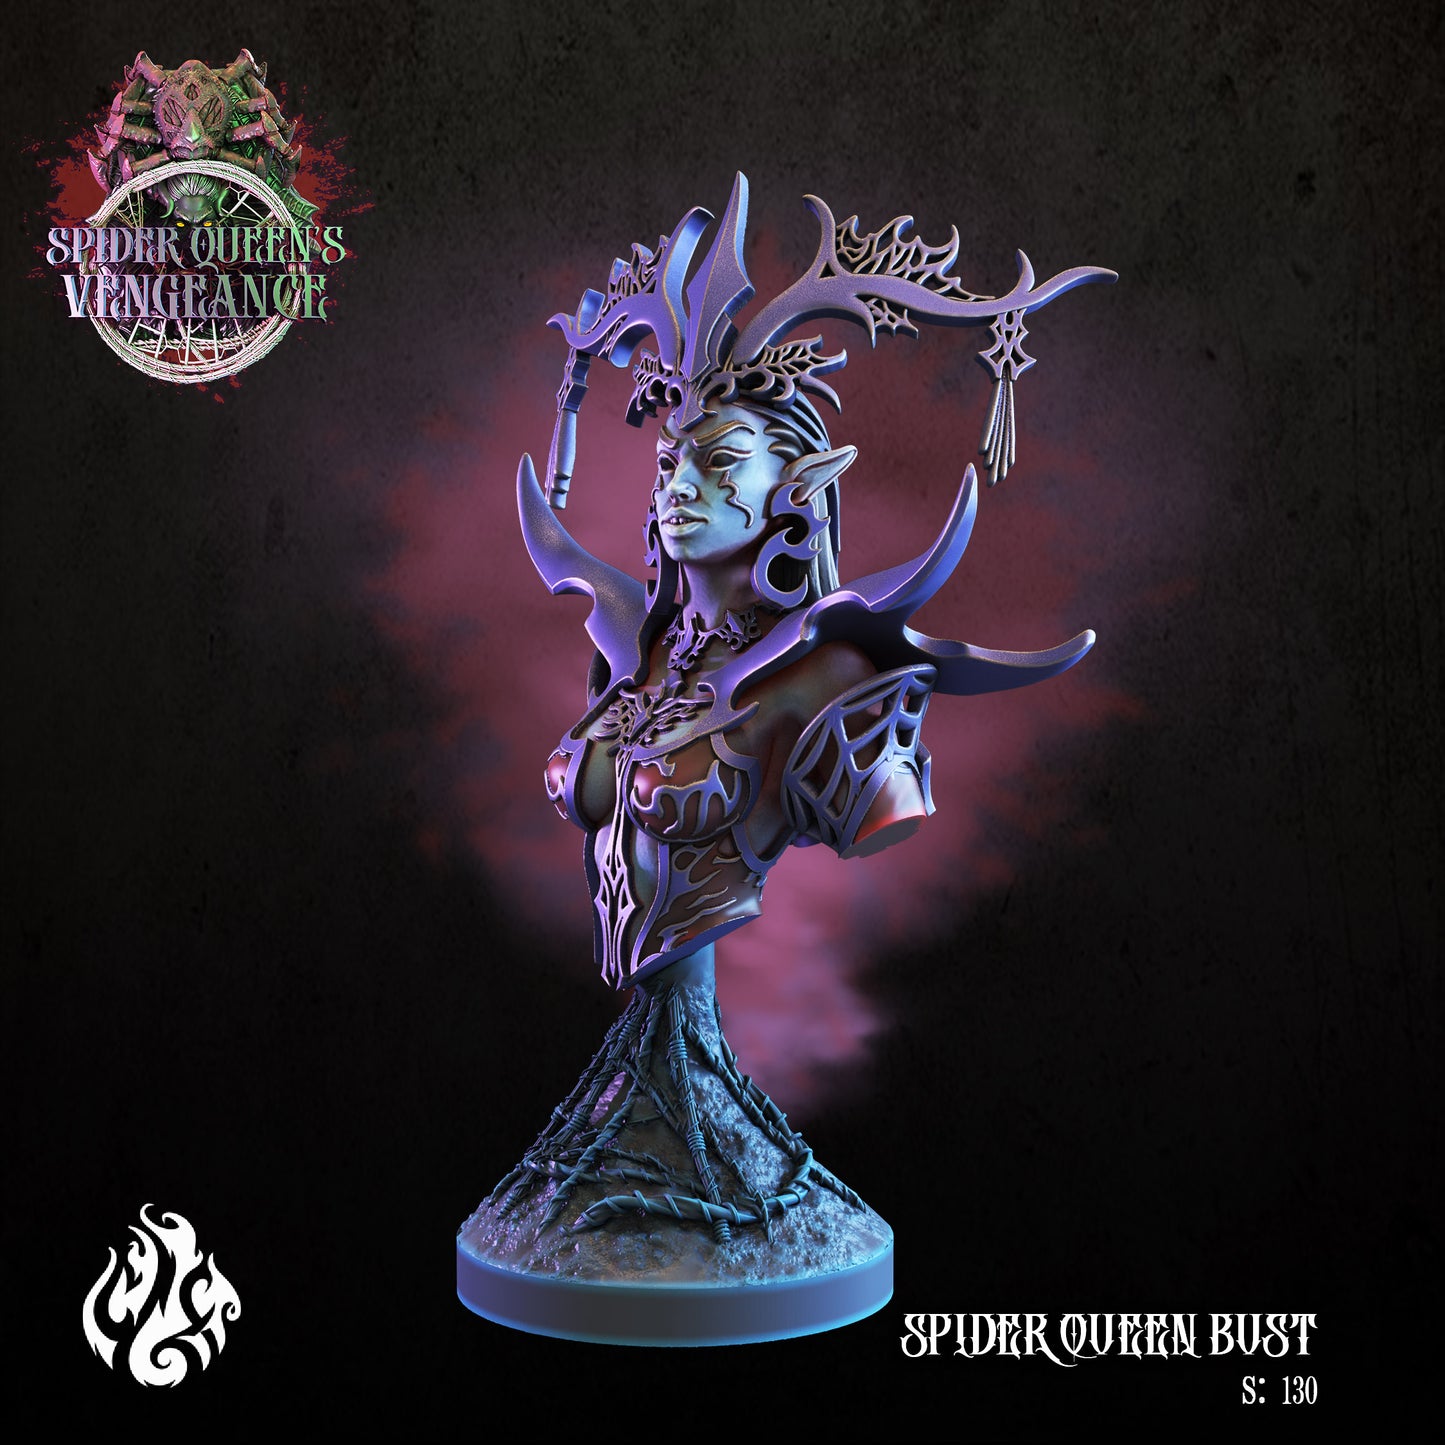 Bust of G'elyanna Abaeir the Spider Queen Spider Queen's Vengeance Series from Crippled God Foundry - Table-top gaming mini and collectable for painting.